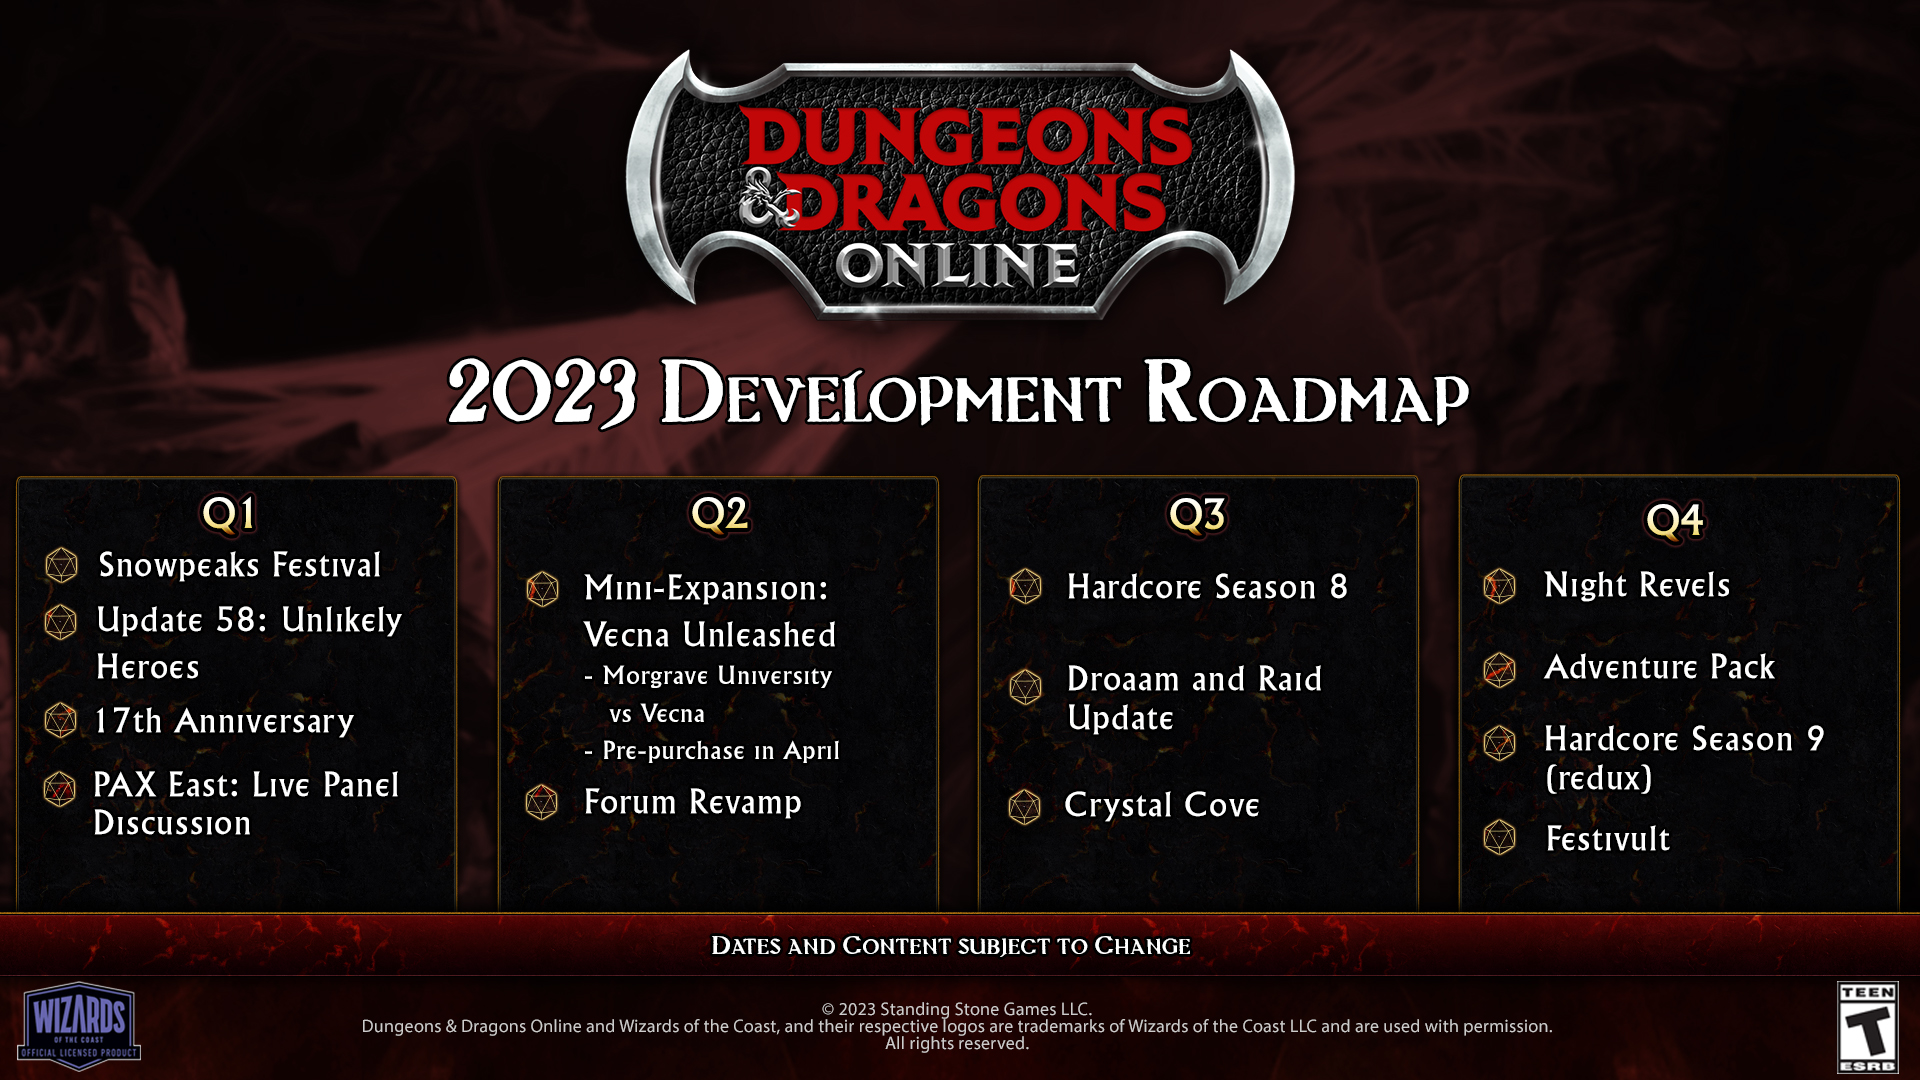 D&D Online 2023 roadmap showing Snowpeaks Festival, Update 58, and 17th Anniversary in Q1, Mini-expansion and Forum update in Q2, Hardcore Season 8, Droaam and Raid Update, and Crystal Cove in Q3, and Night Revals, Adventure Pack, Hardcore Season 9, and Festivult in Q4 of the year